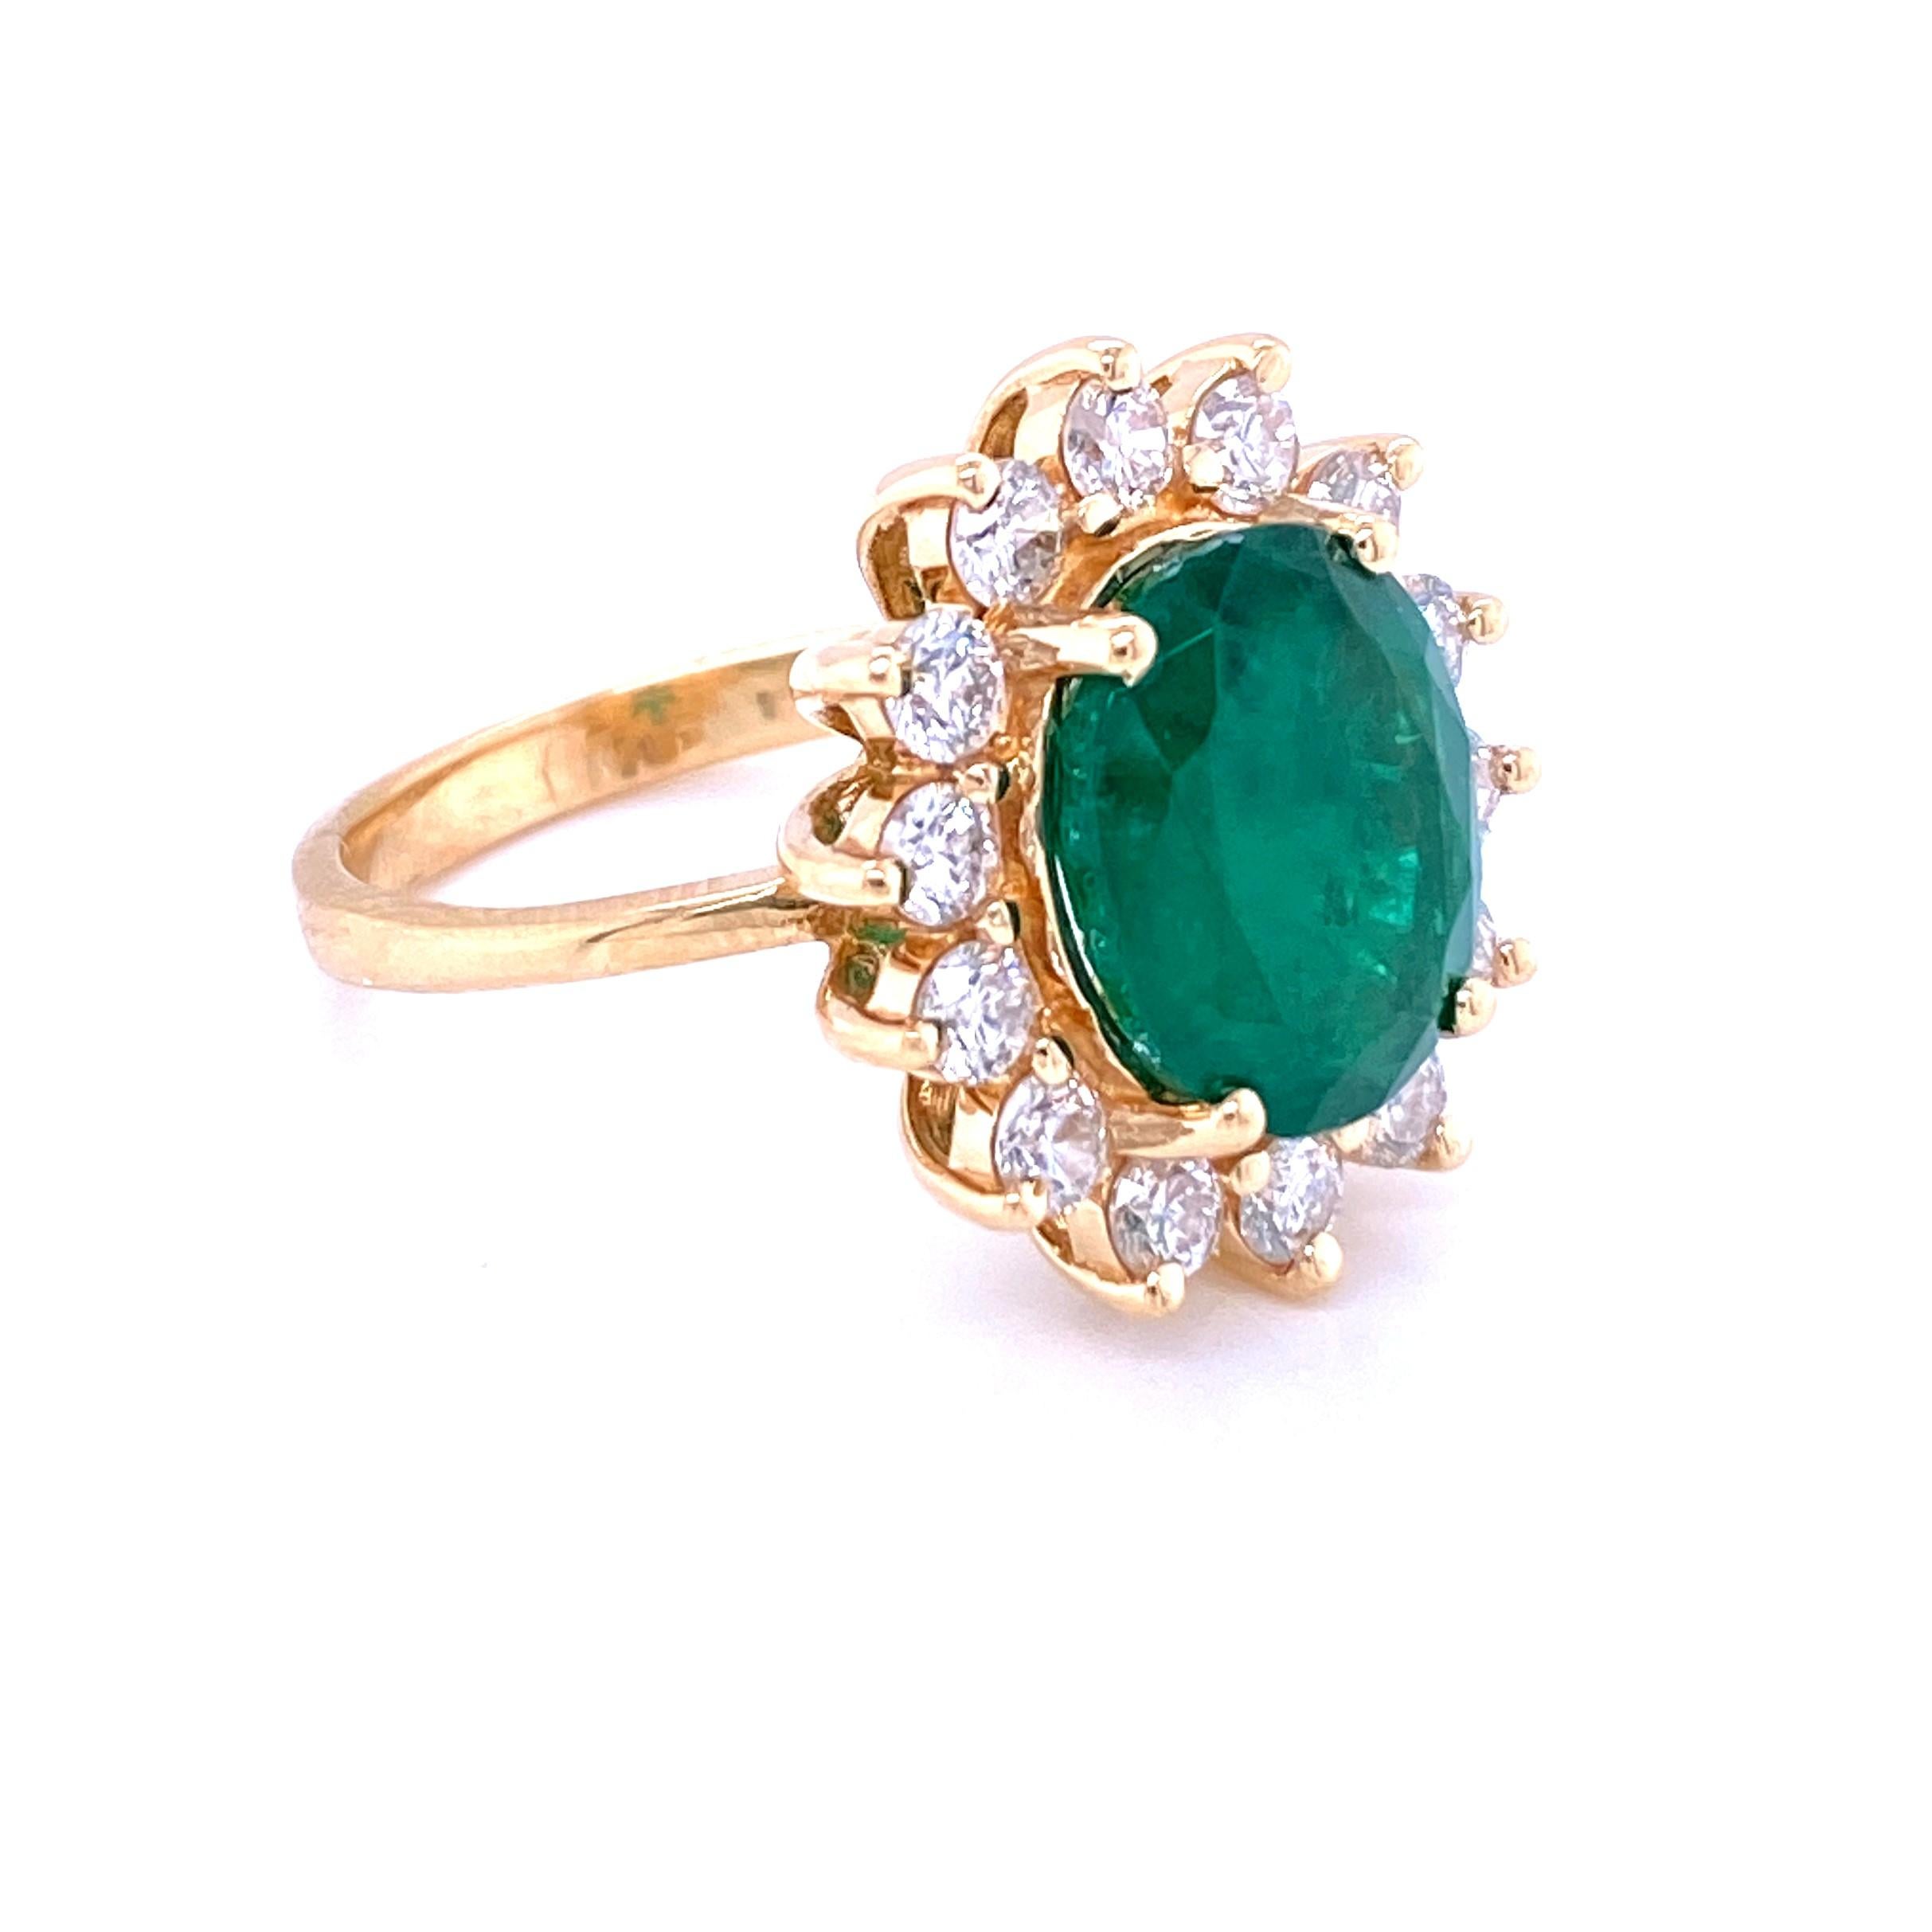 14 karat yellow gold (stamped 14K EFFY) ring set with one 10.8x9mm oval emerald surrounded by fourteen round brilliant diamonds, approximately 1.00 carat total weight with matching H/I color and I1 clarity. The shank measures 2.4mm at the base and